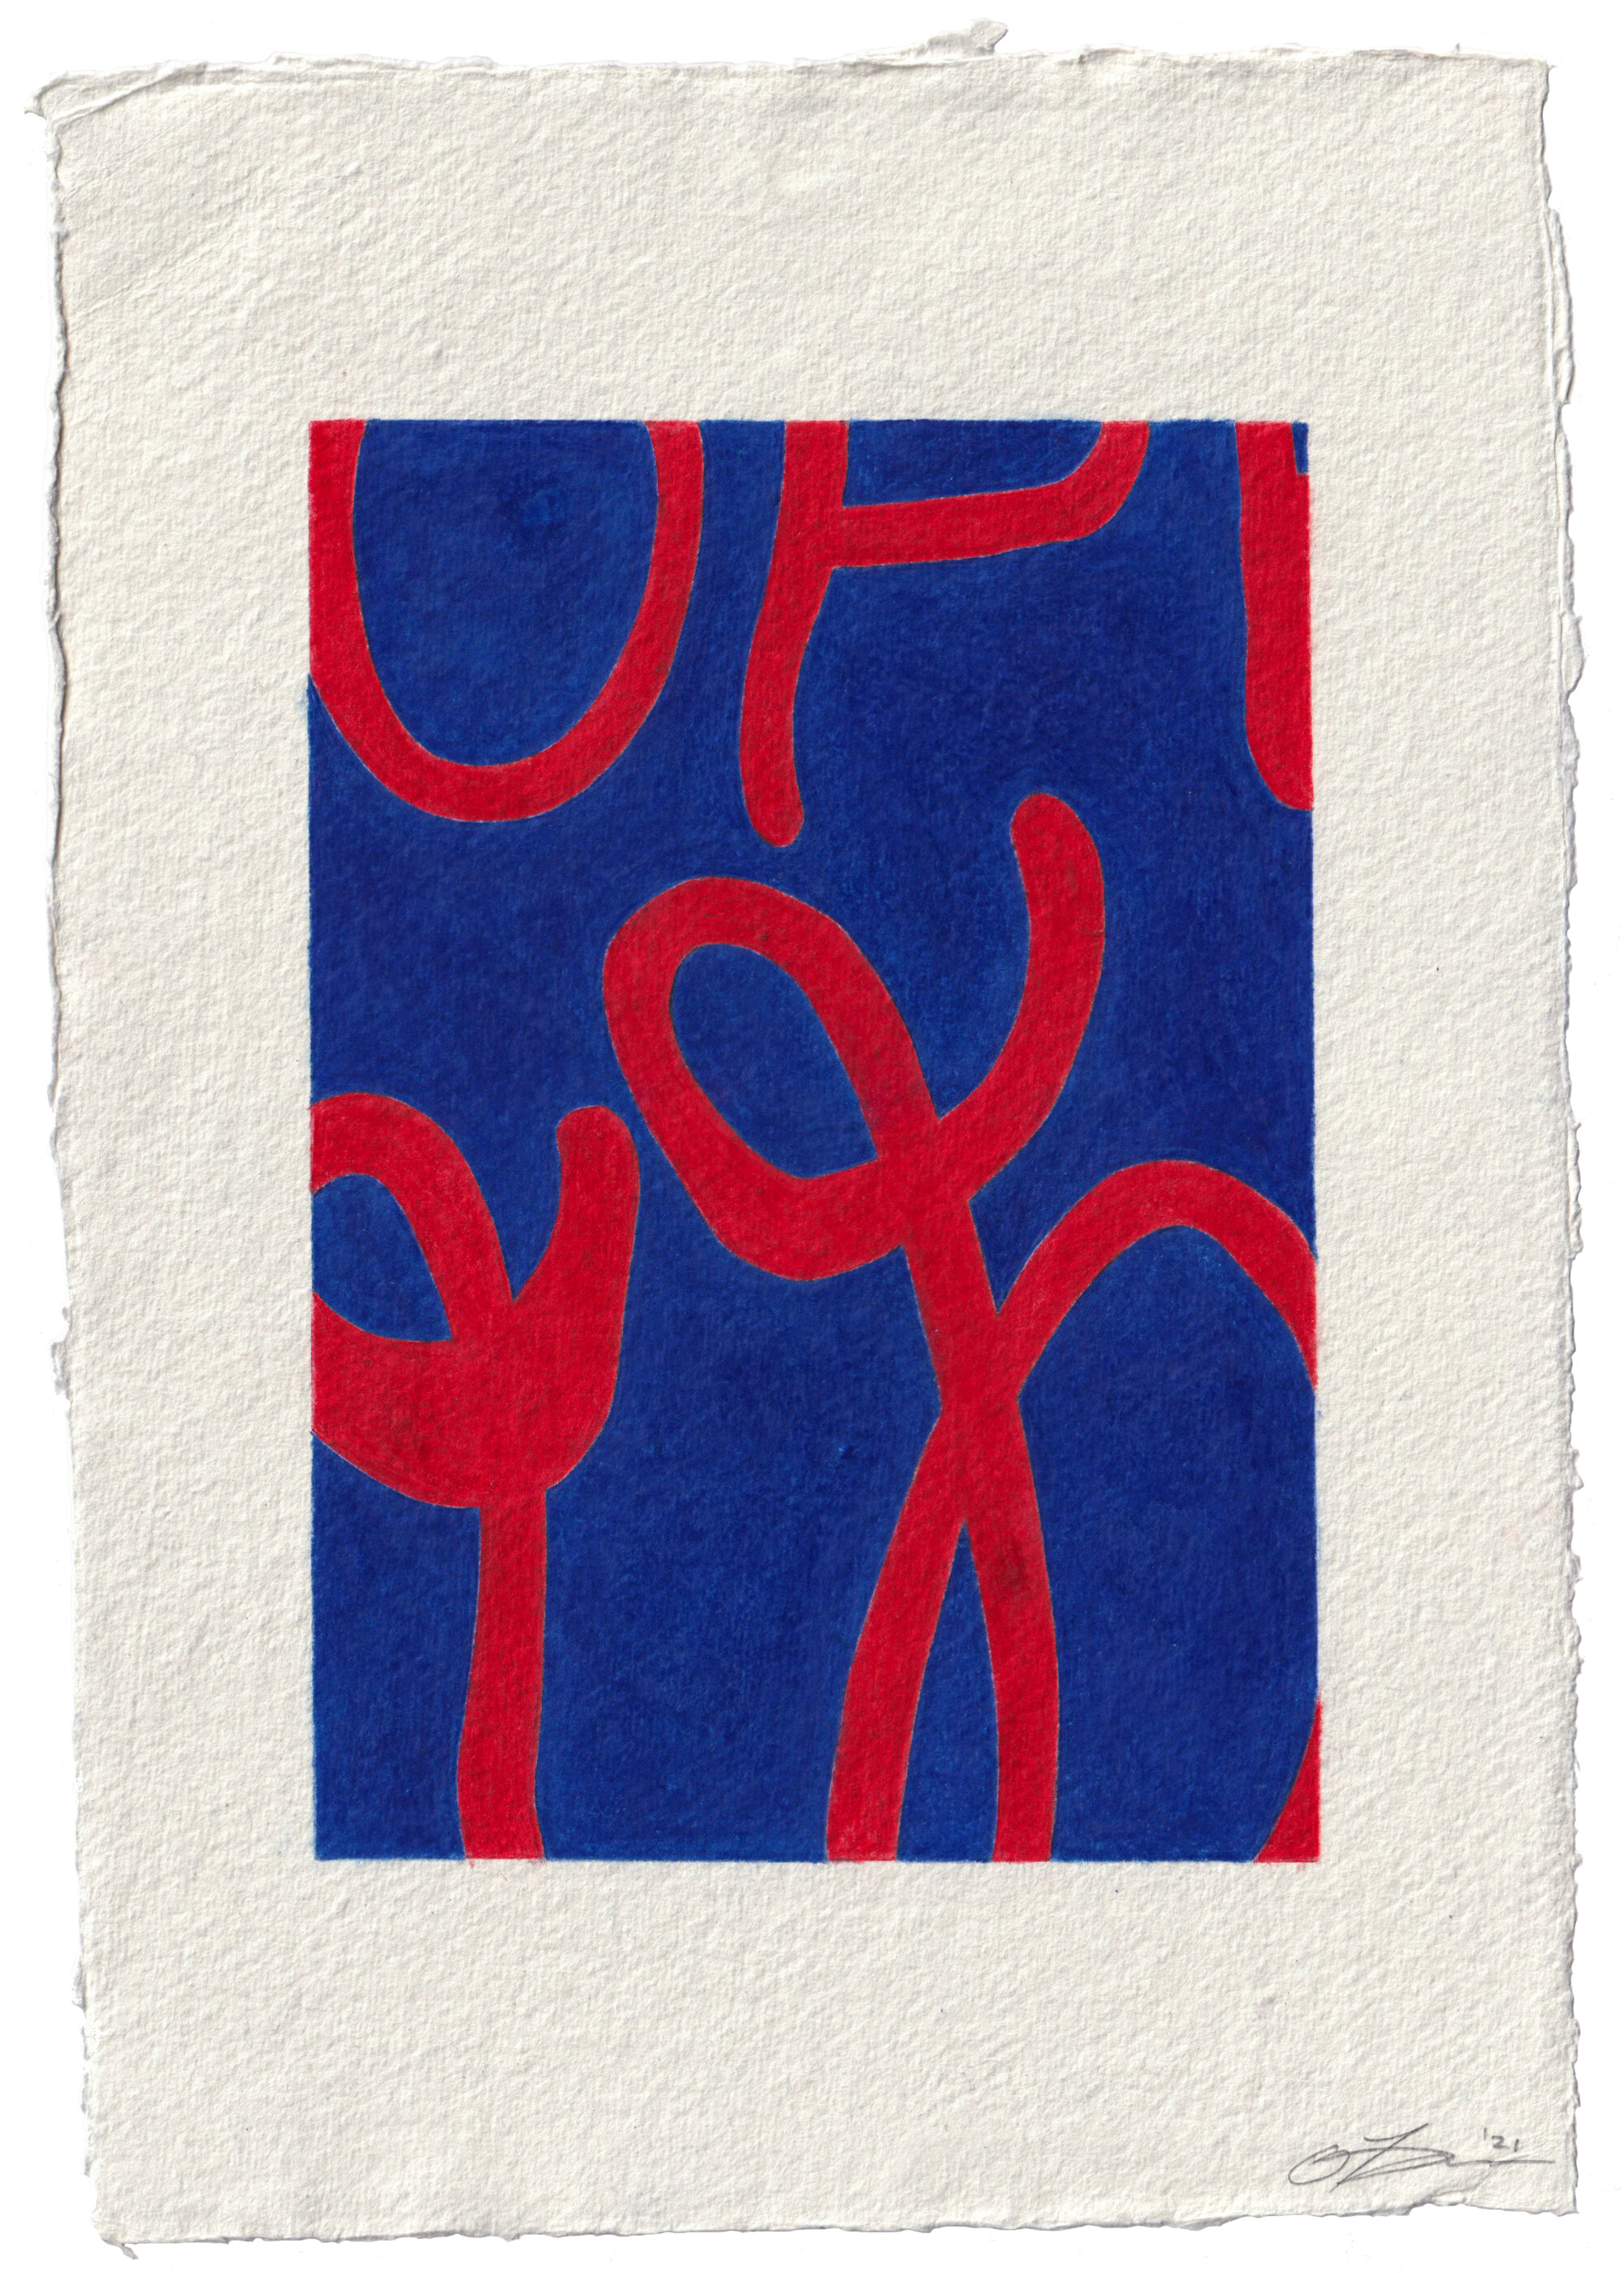 Untitled (Red & Blue)